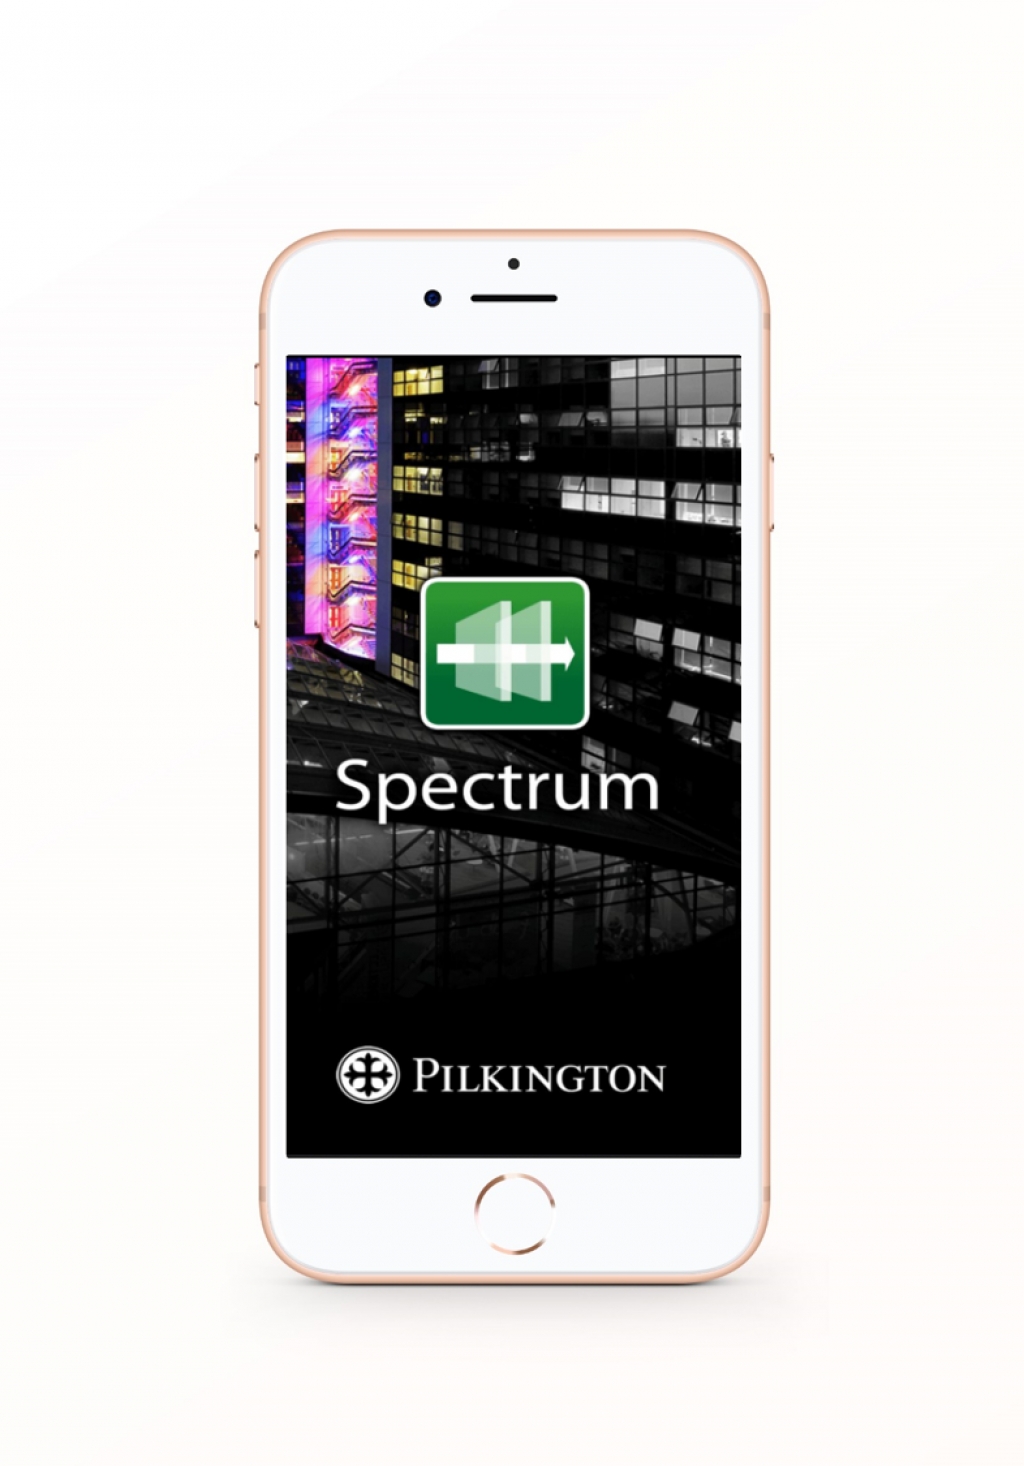 Pilkington Spectrum now available for on-the-go use via new smartphone app